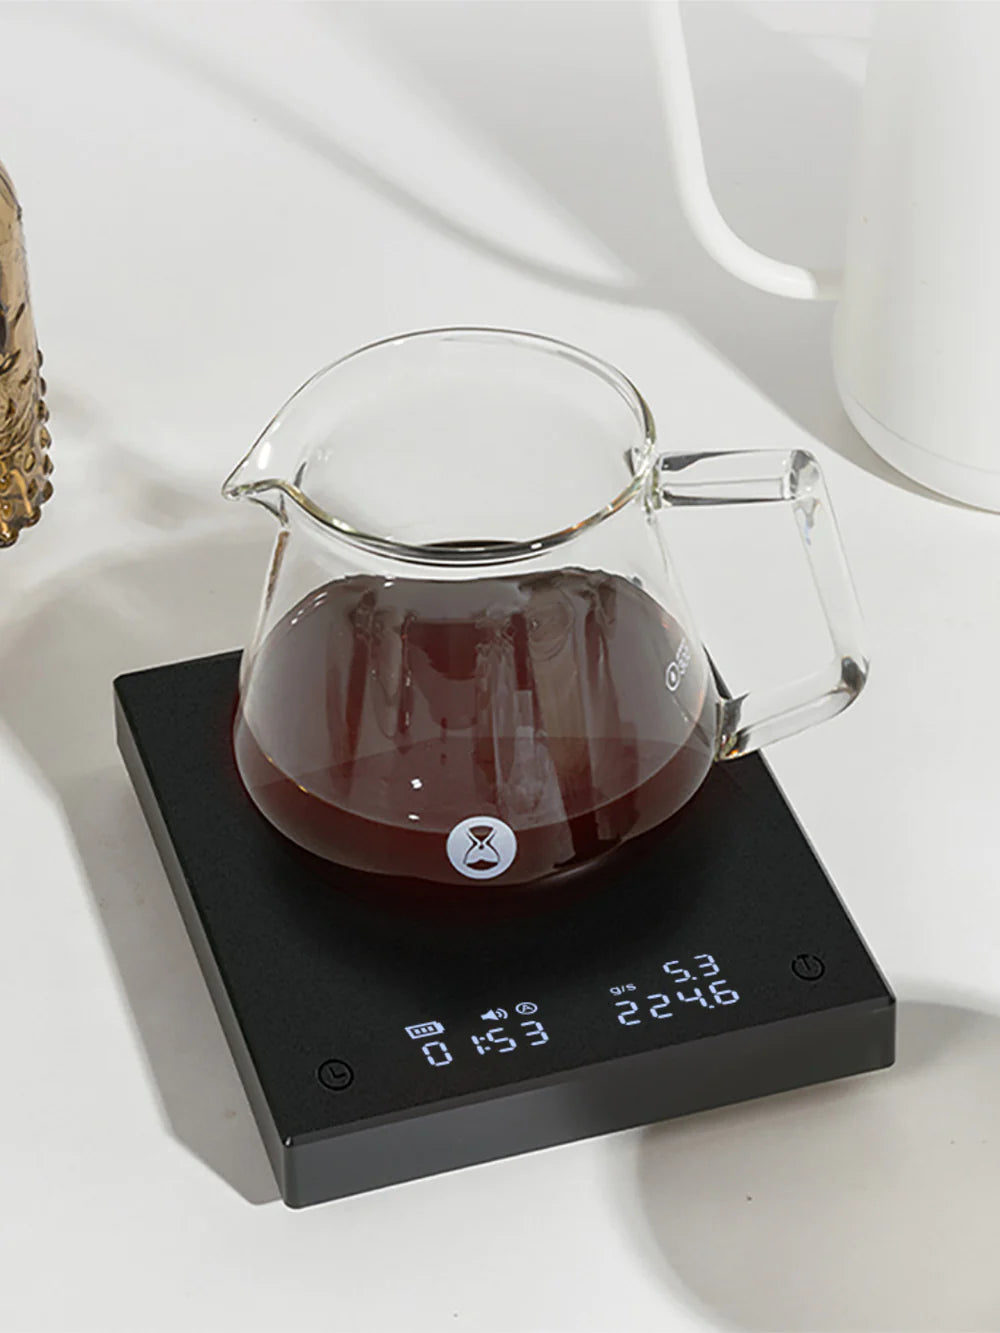 Timemore Black Mirror BASIC 2 Coffee Scale - Image 8